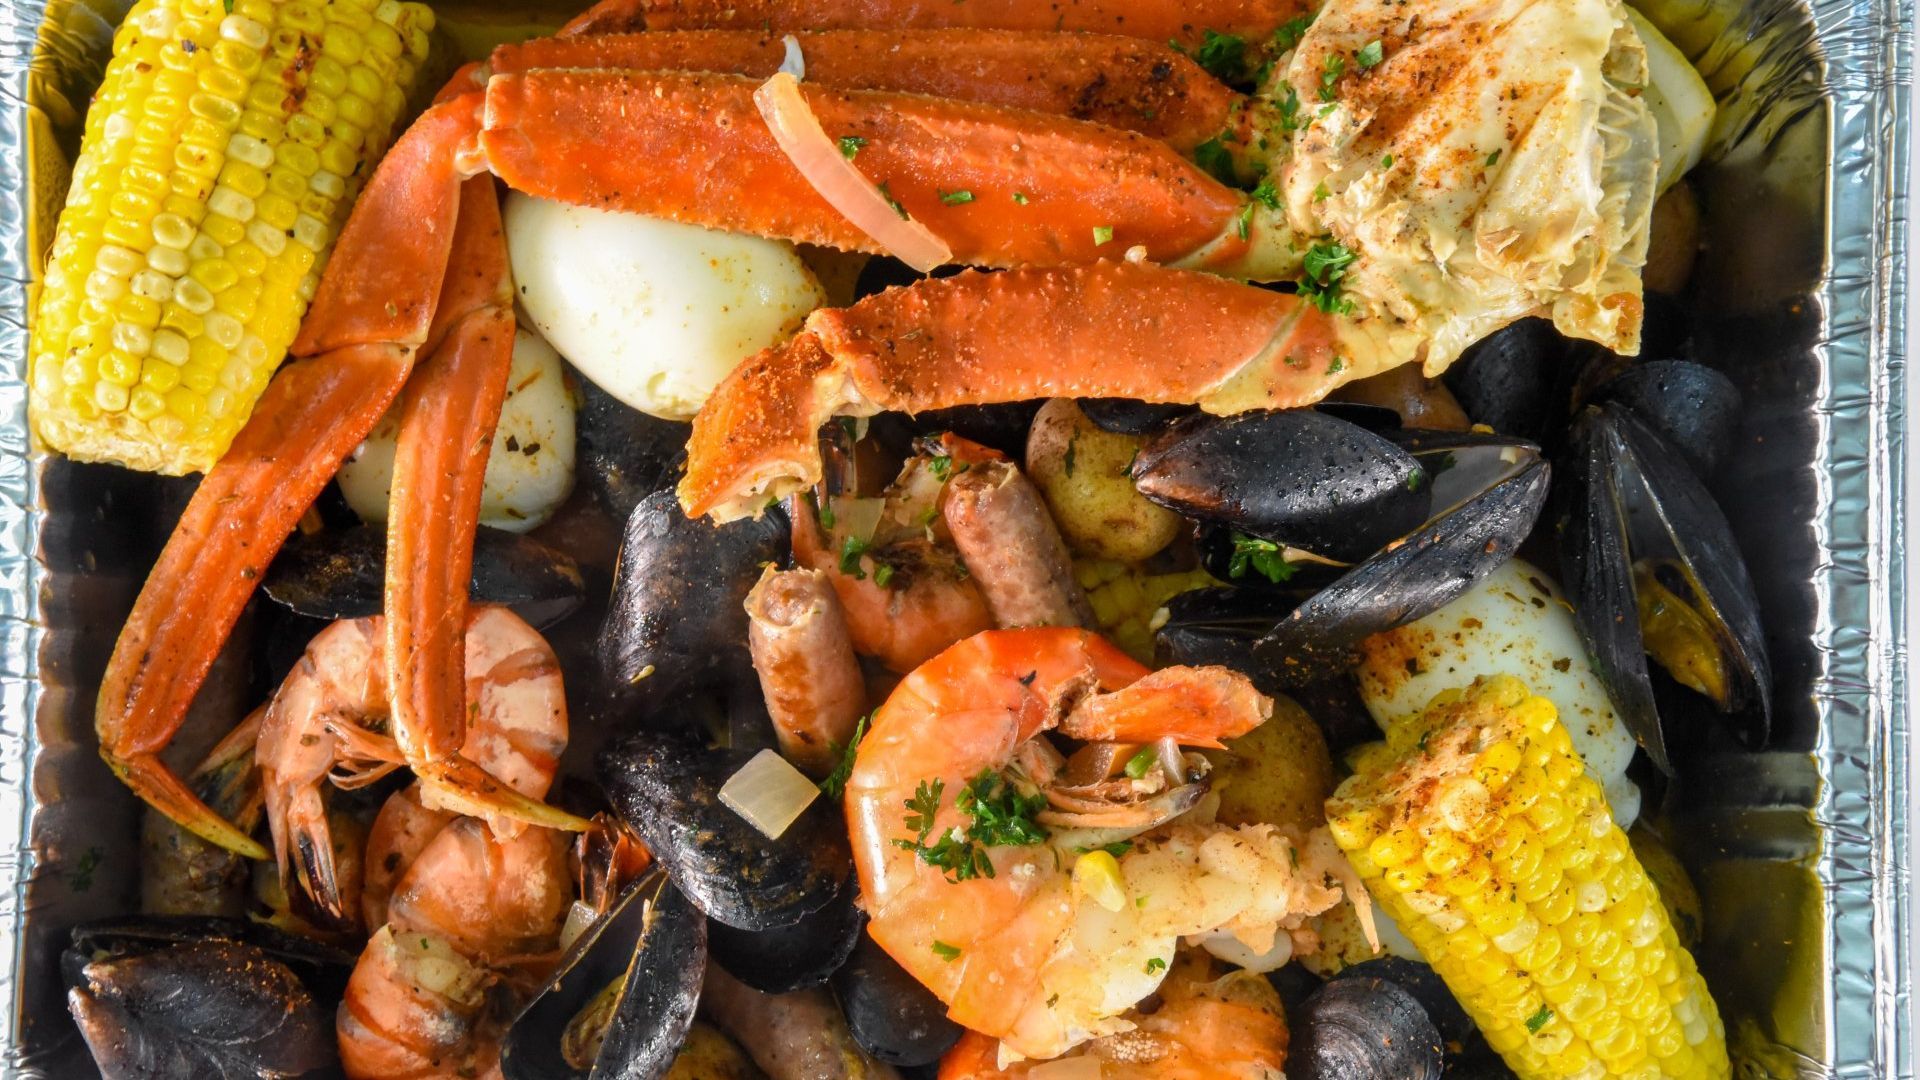 Crab and other sea foods in a platter